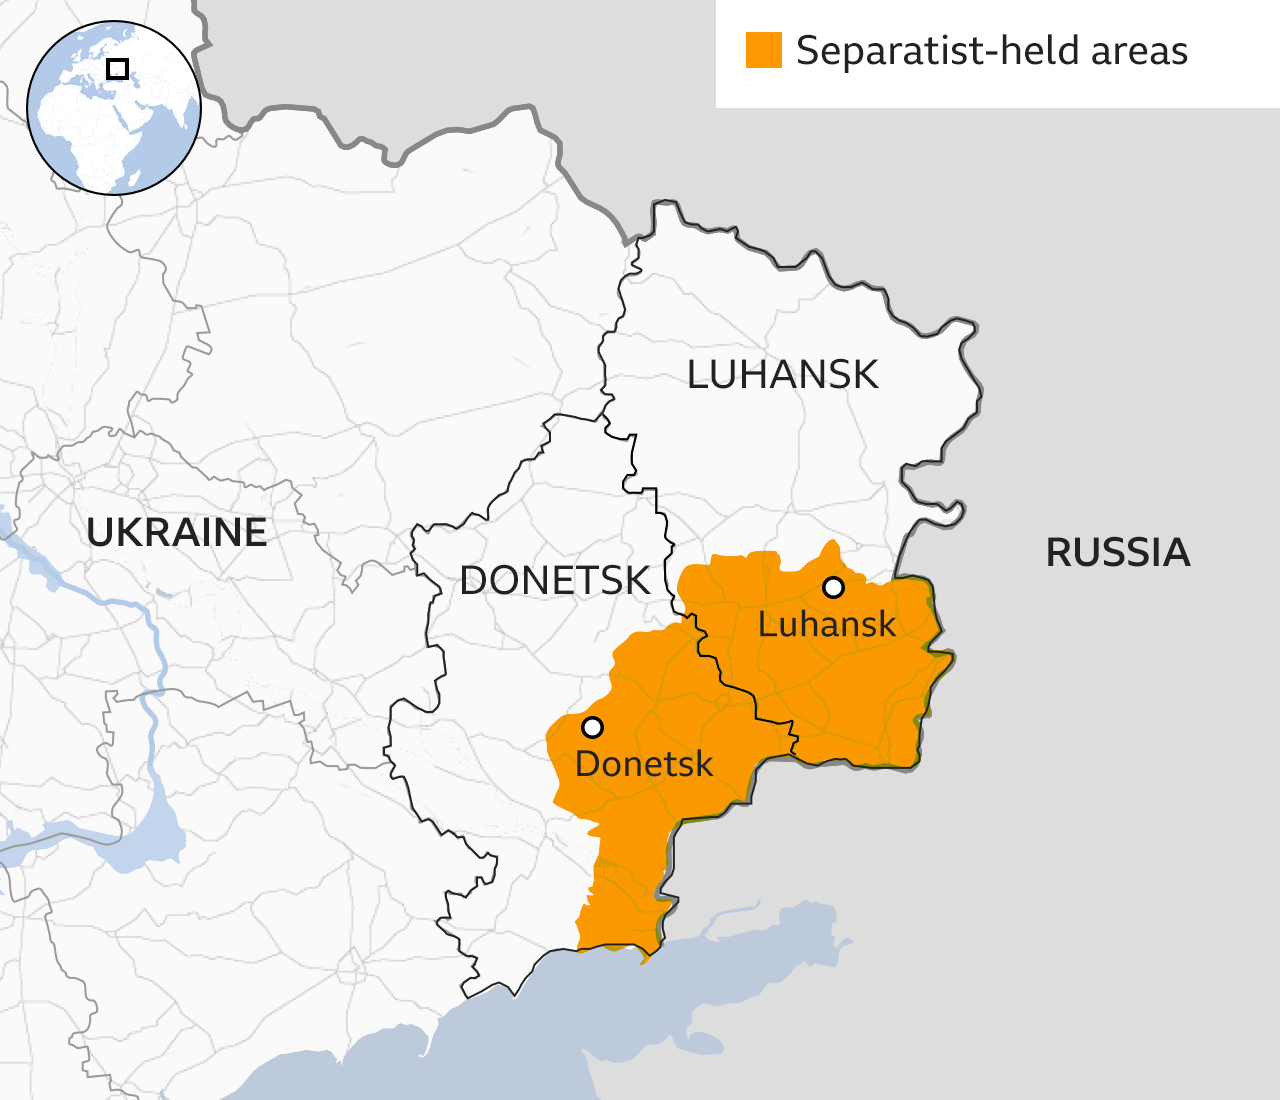 Map showing the separatist regions in Luhansk and Donetsk in eastern Ukraine